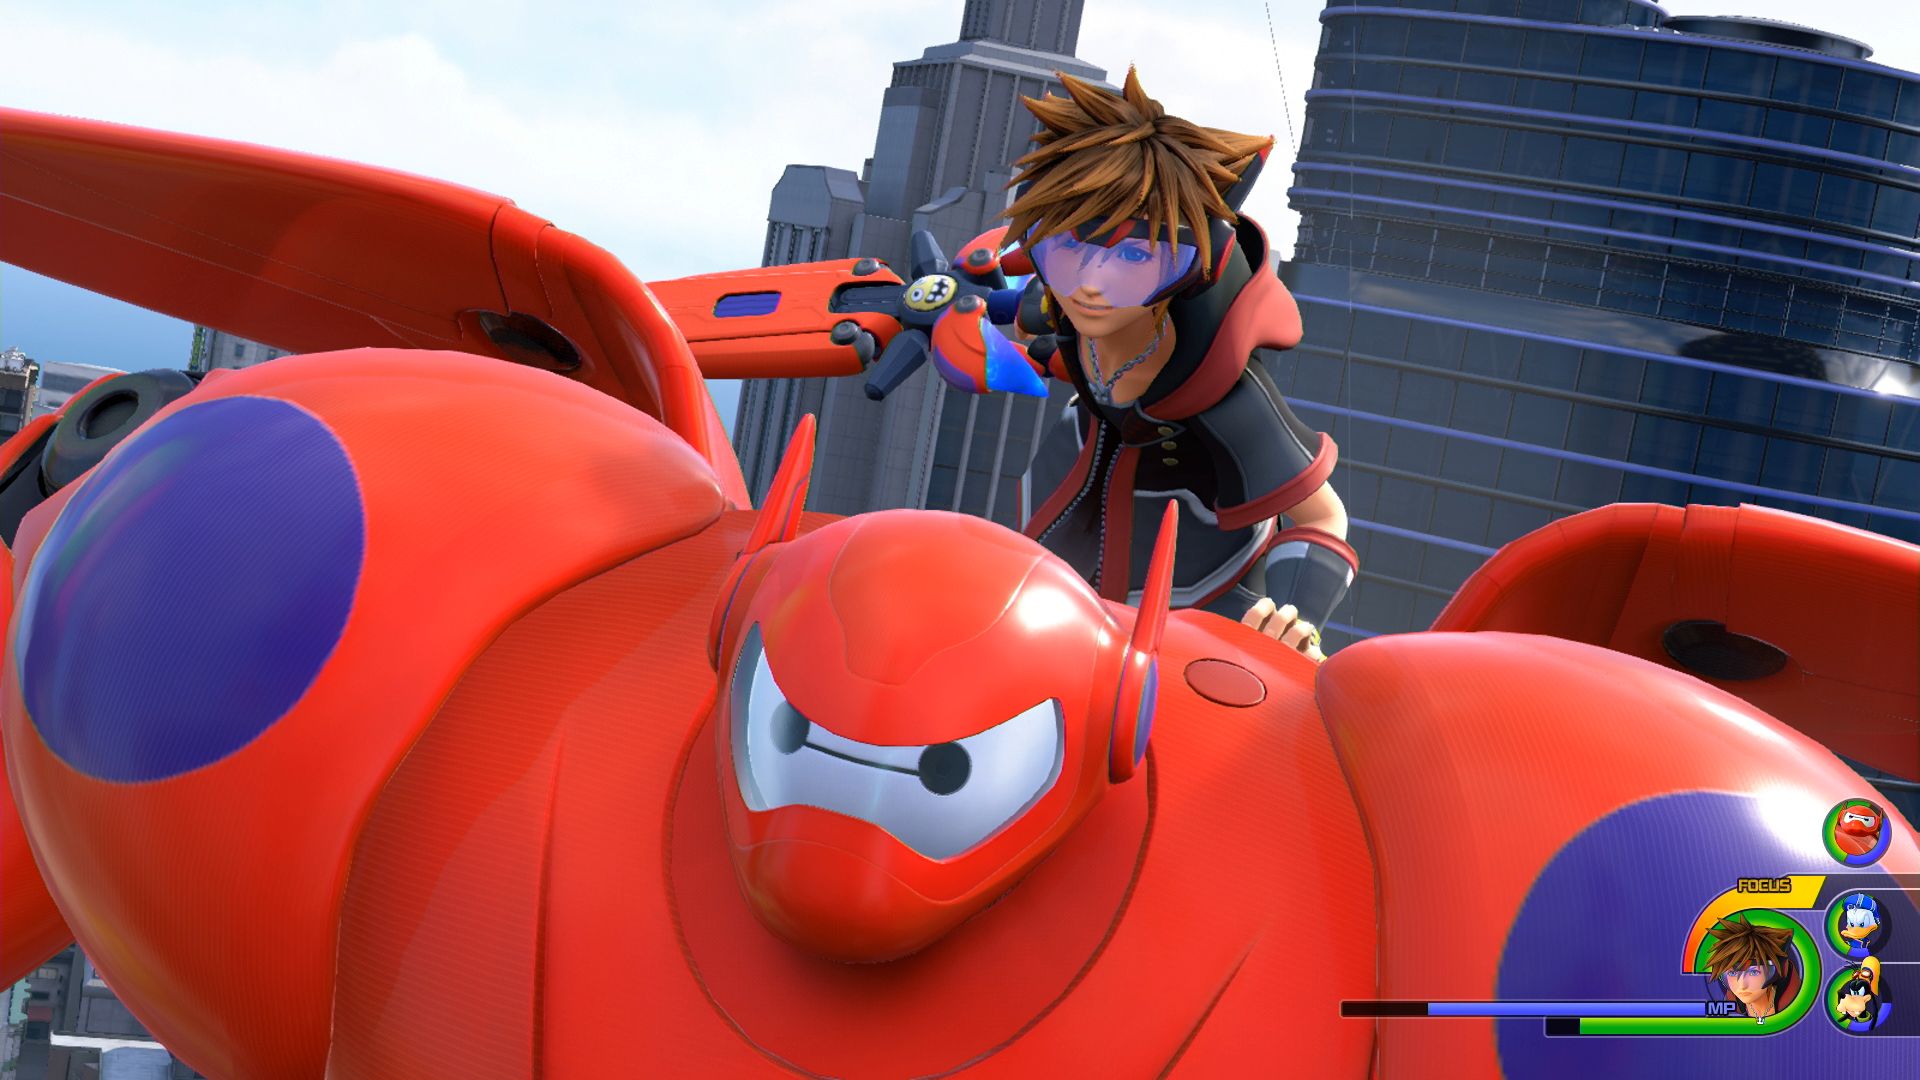 kingdom-hearts-iii-and-resident-evil-2-top-japanese-sales-for-second-week-in-a-row